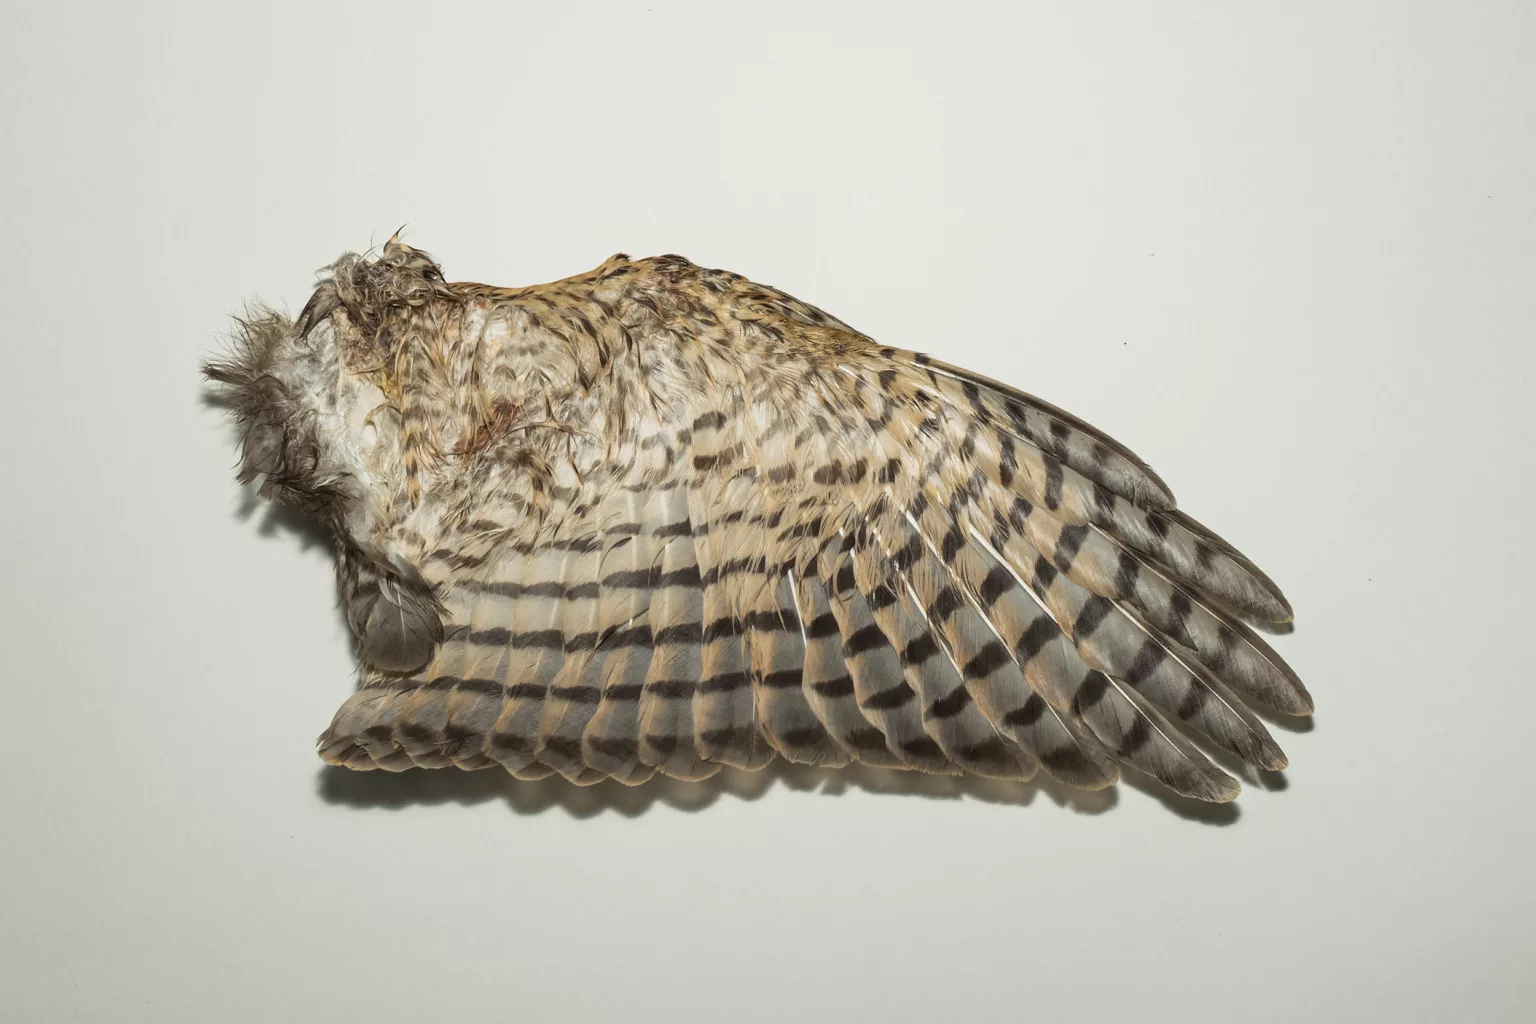 Full Wing - Ventral View